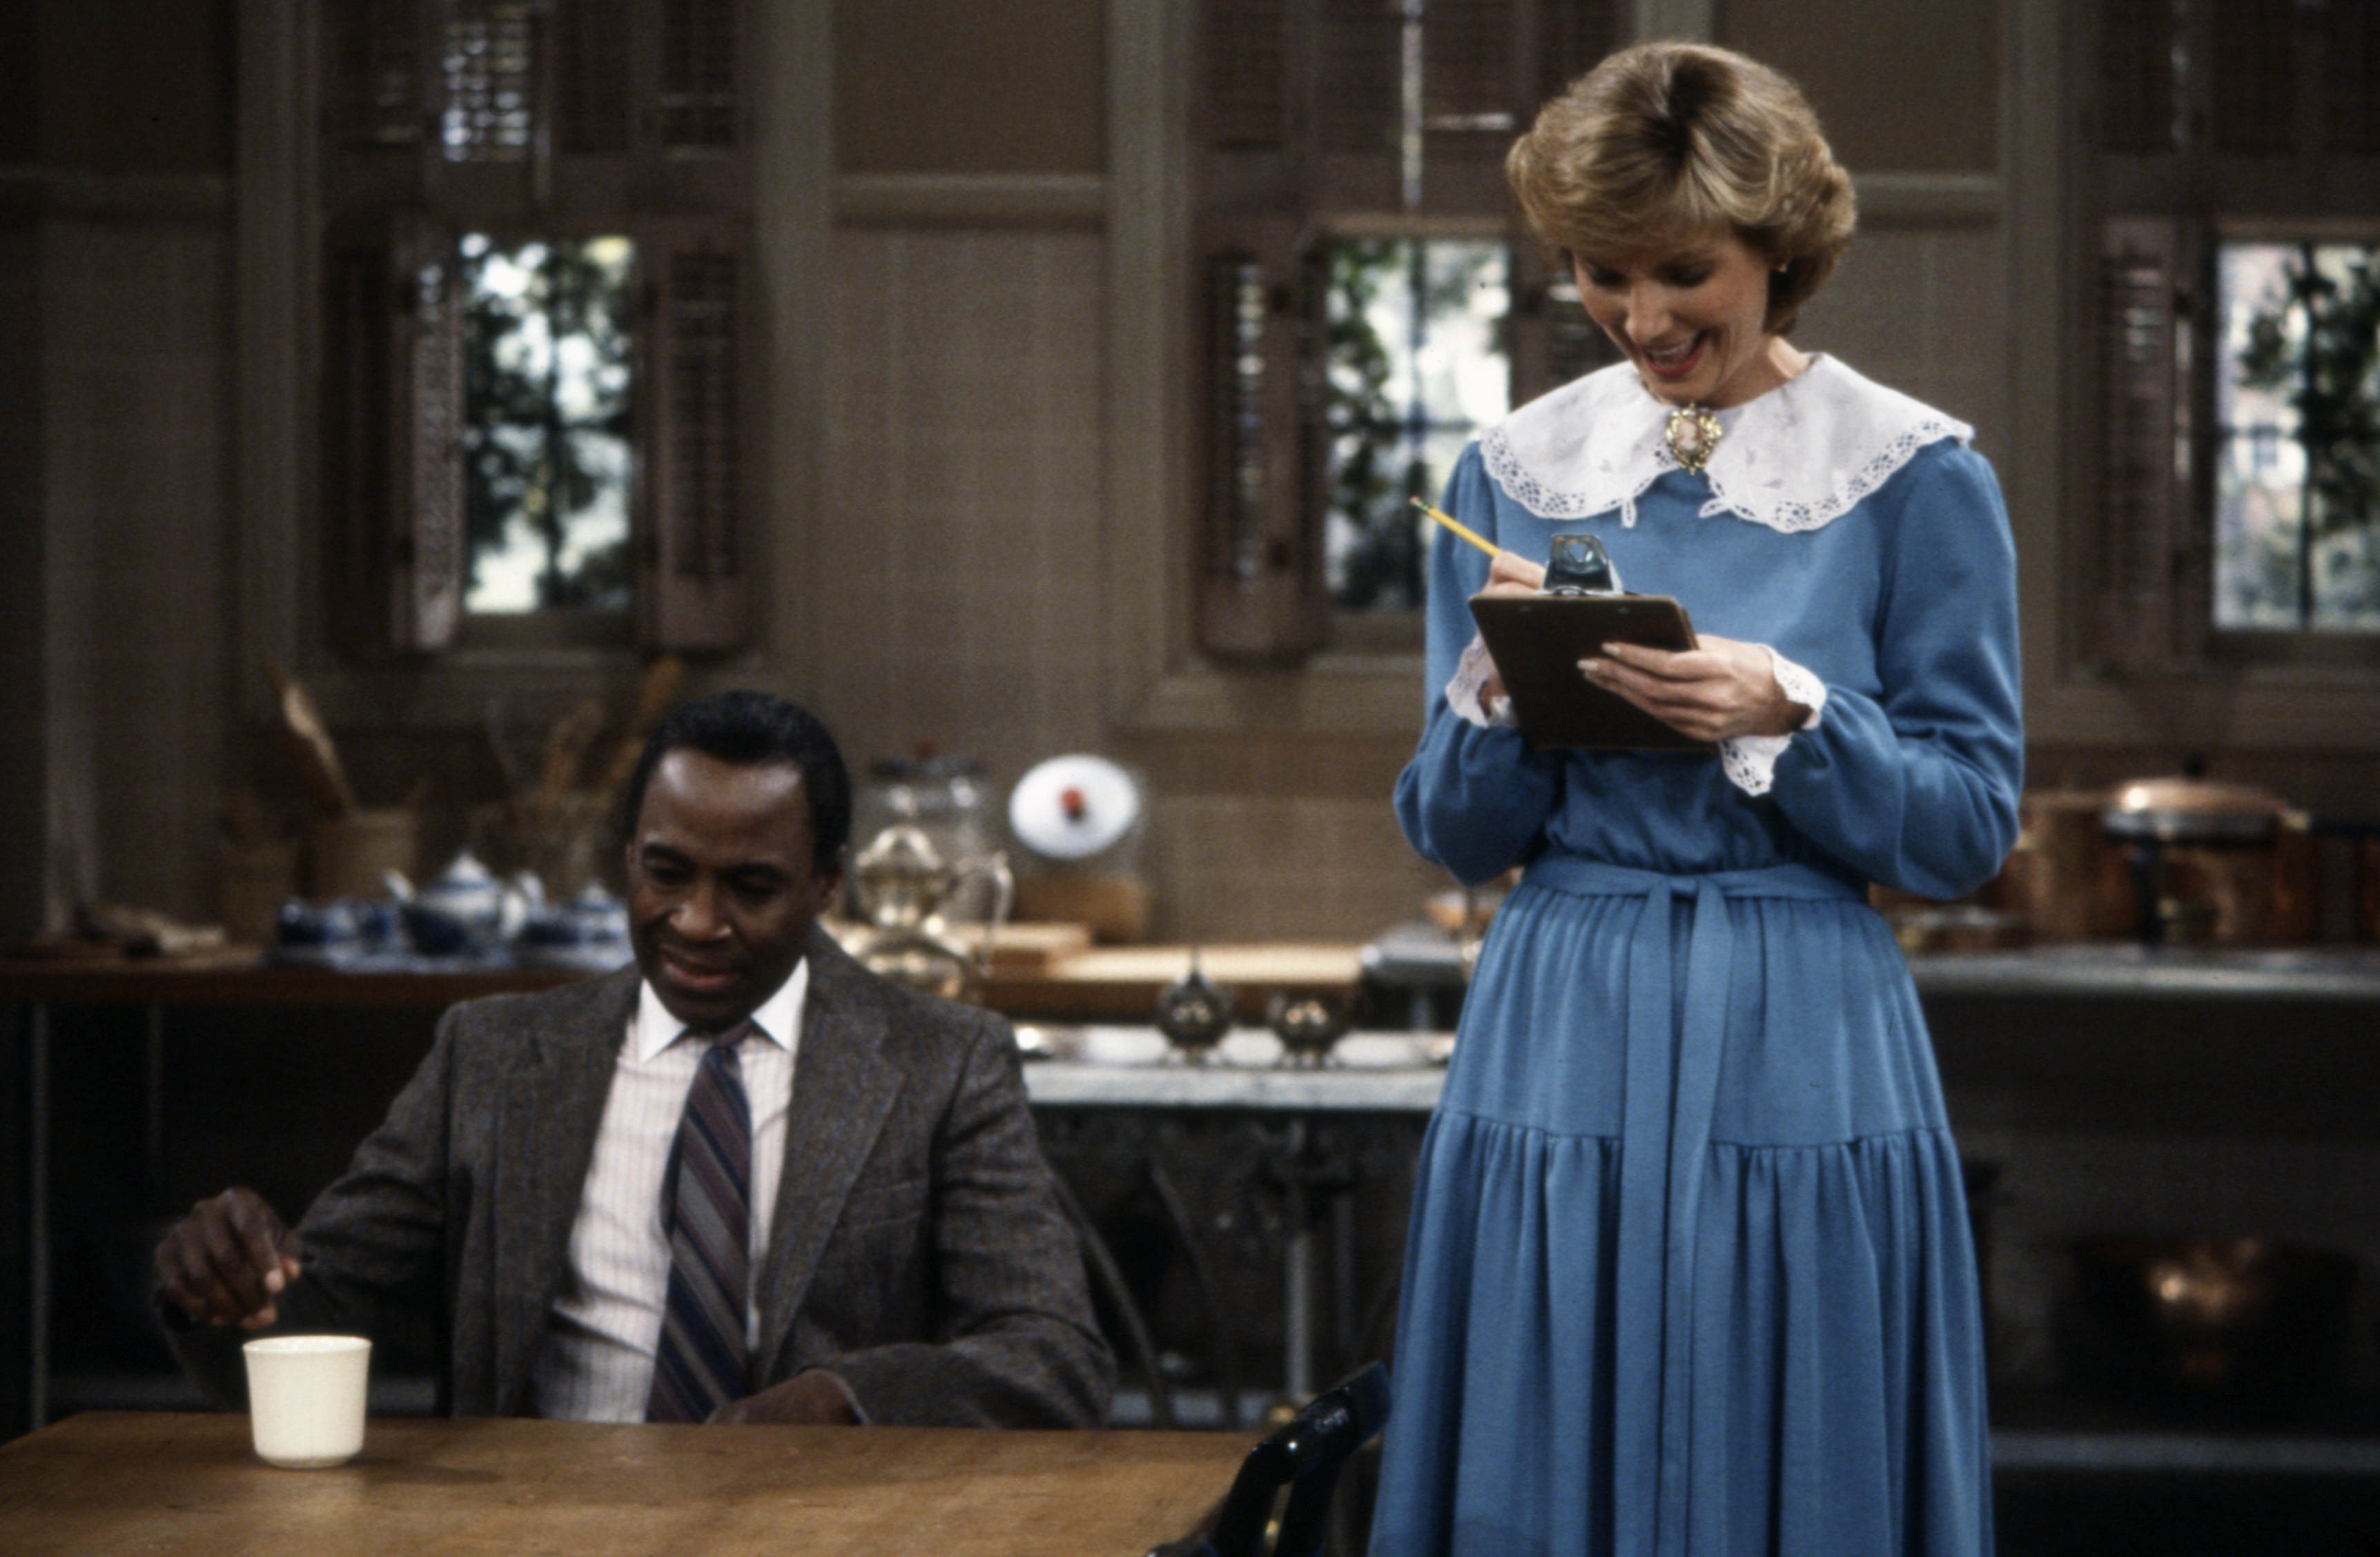 Actor Robert Guillaume as Benson DuBois and Inga Swenson as Gretchen Kraus in the series "Benson" on January 1, 1983 in Los Angeles, California | Source: Getty Images